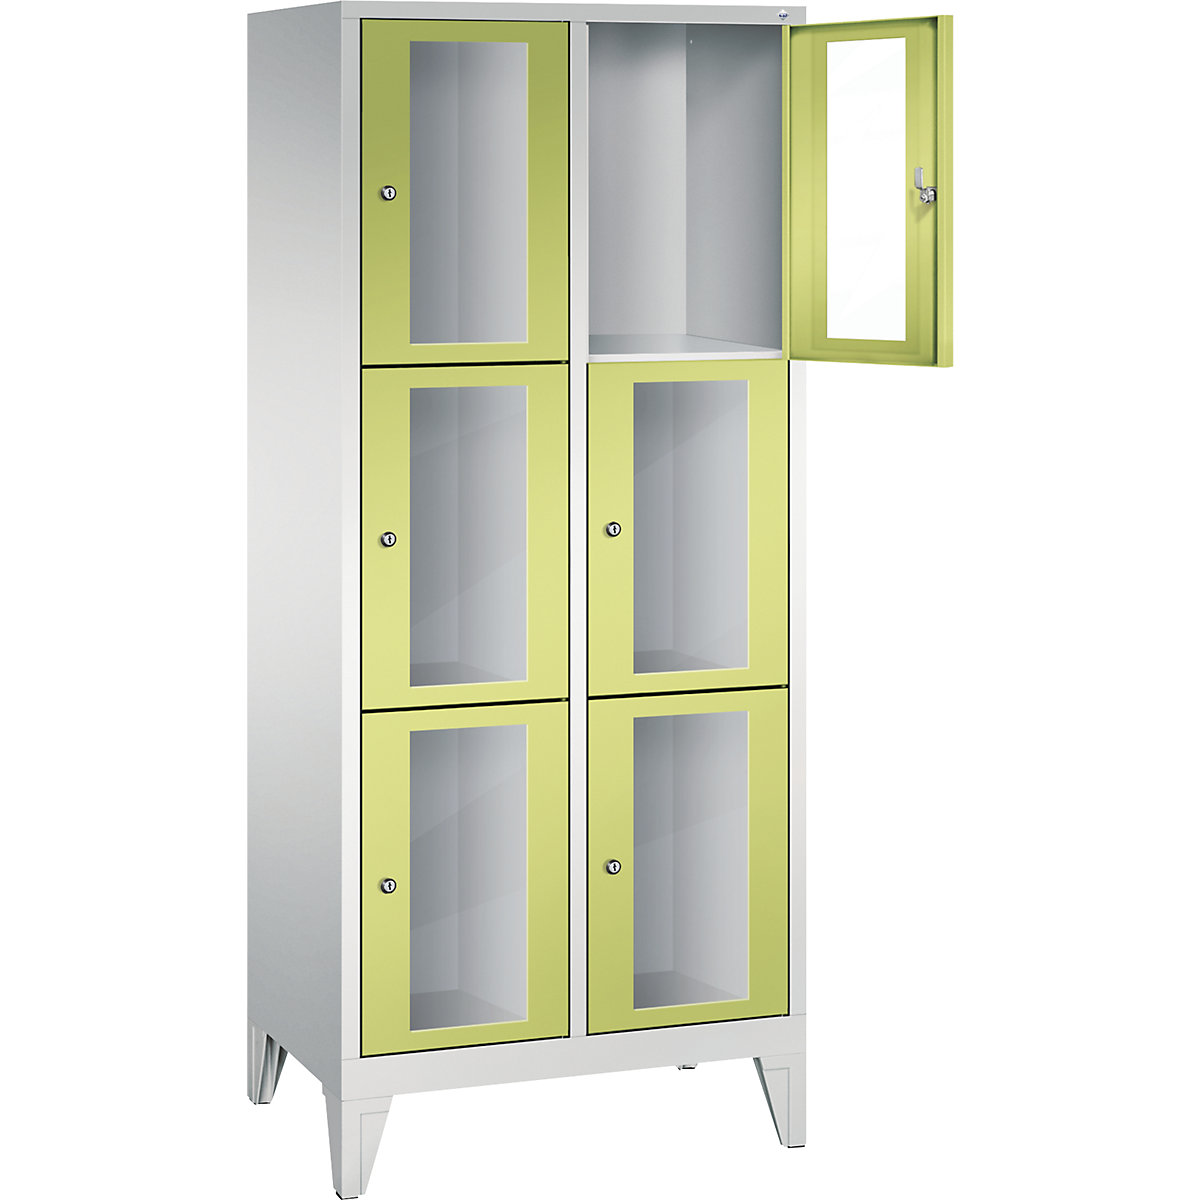 C+P – CLASSIC locker unit, compartment height 510 mm, with feet, 6 compartments, width 810 mm, viridian green door